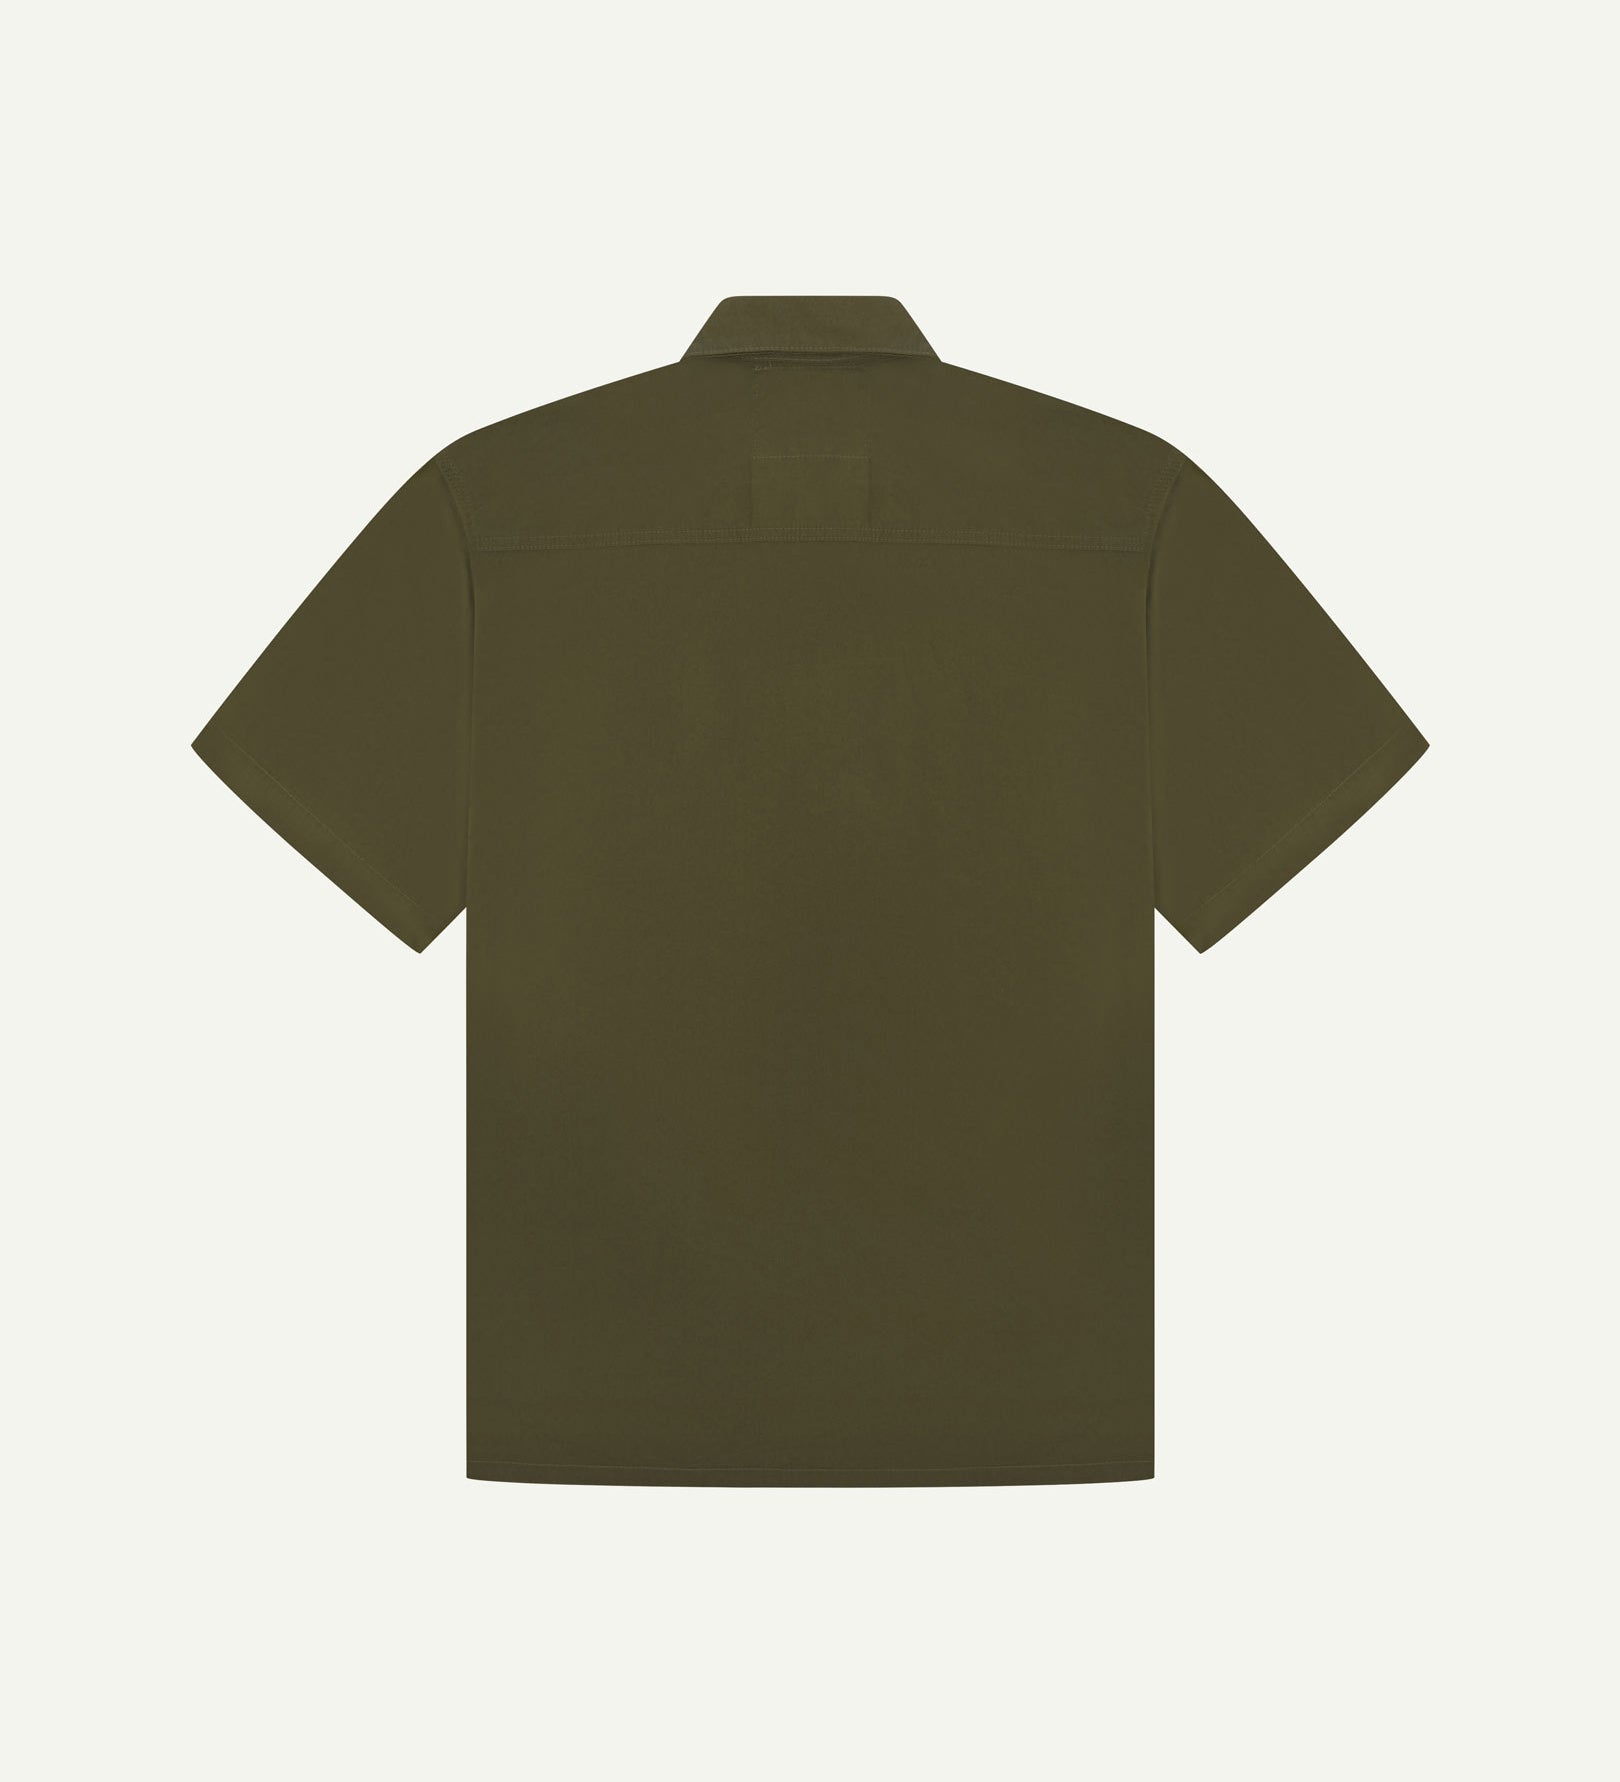 Reverse flat view of olive-green lightweight short sleeve shirt from Uskees.